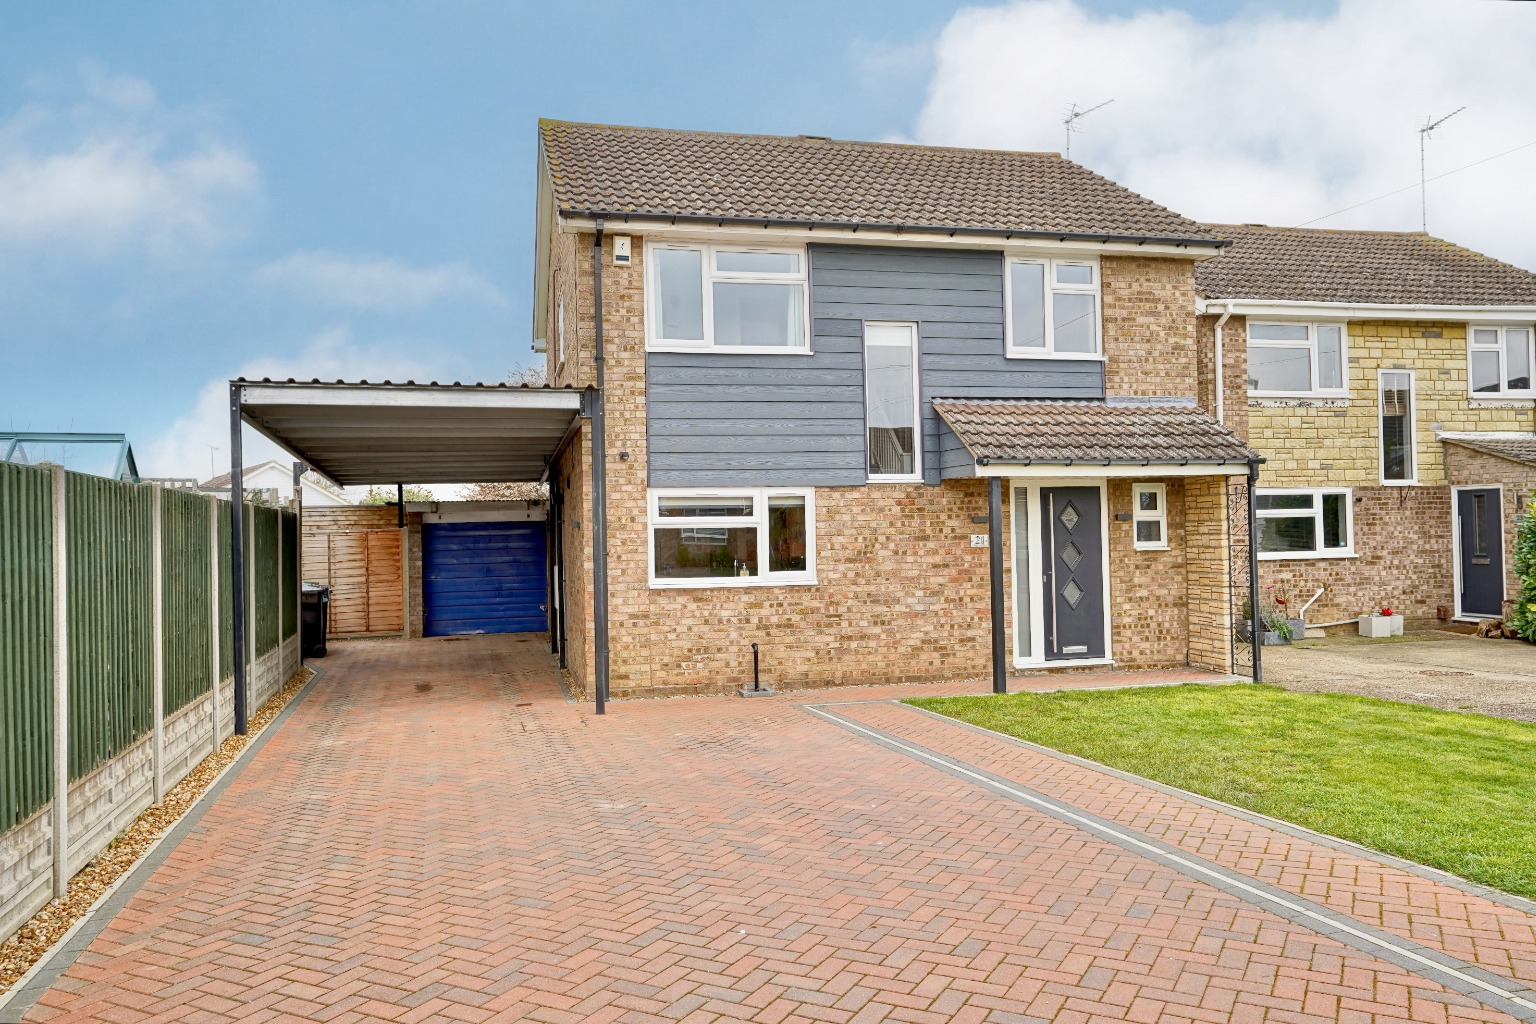 5 bed detached house for sale in Papyrus Way, Huntingdon - Property Image 1